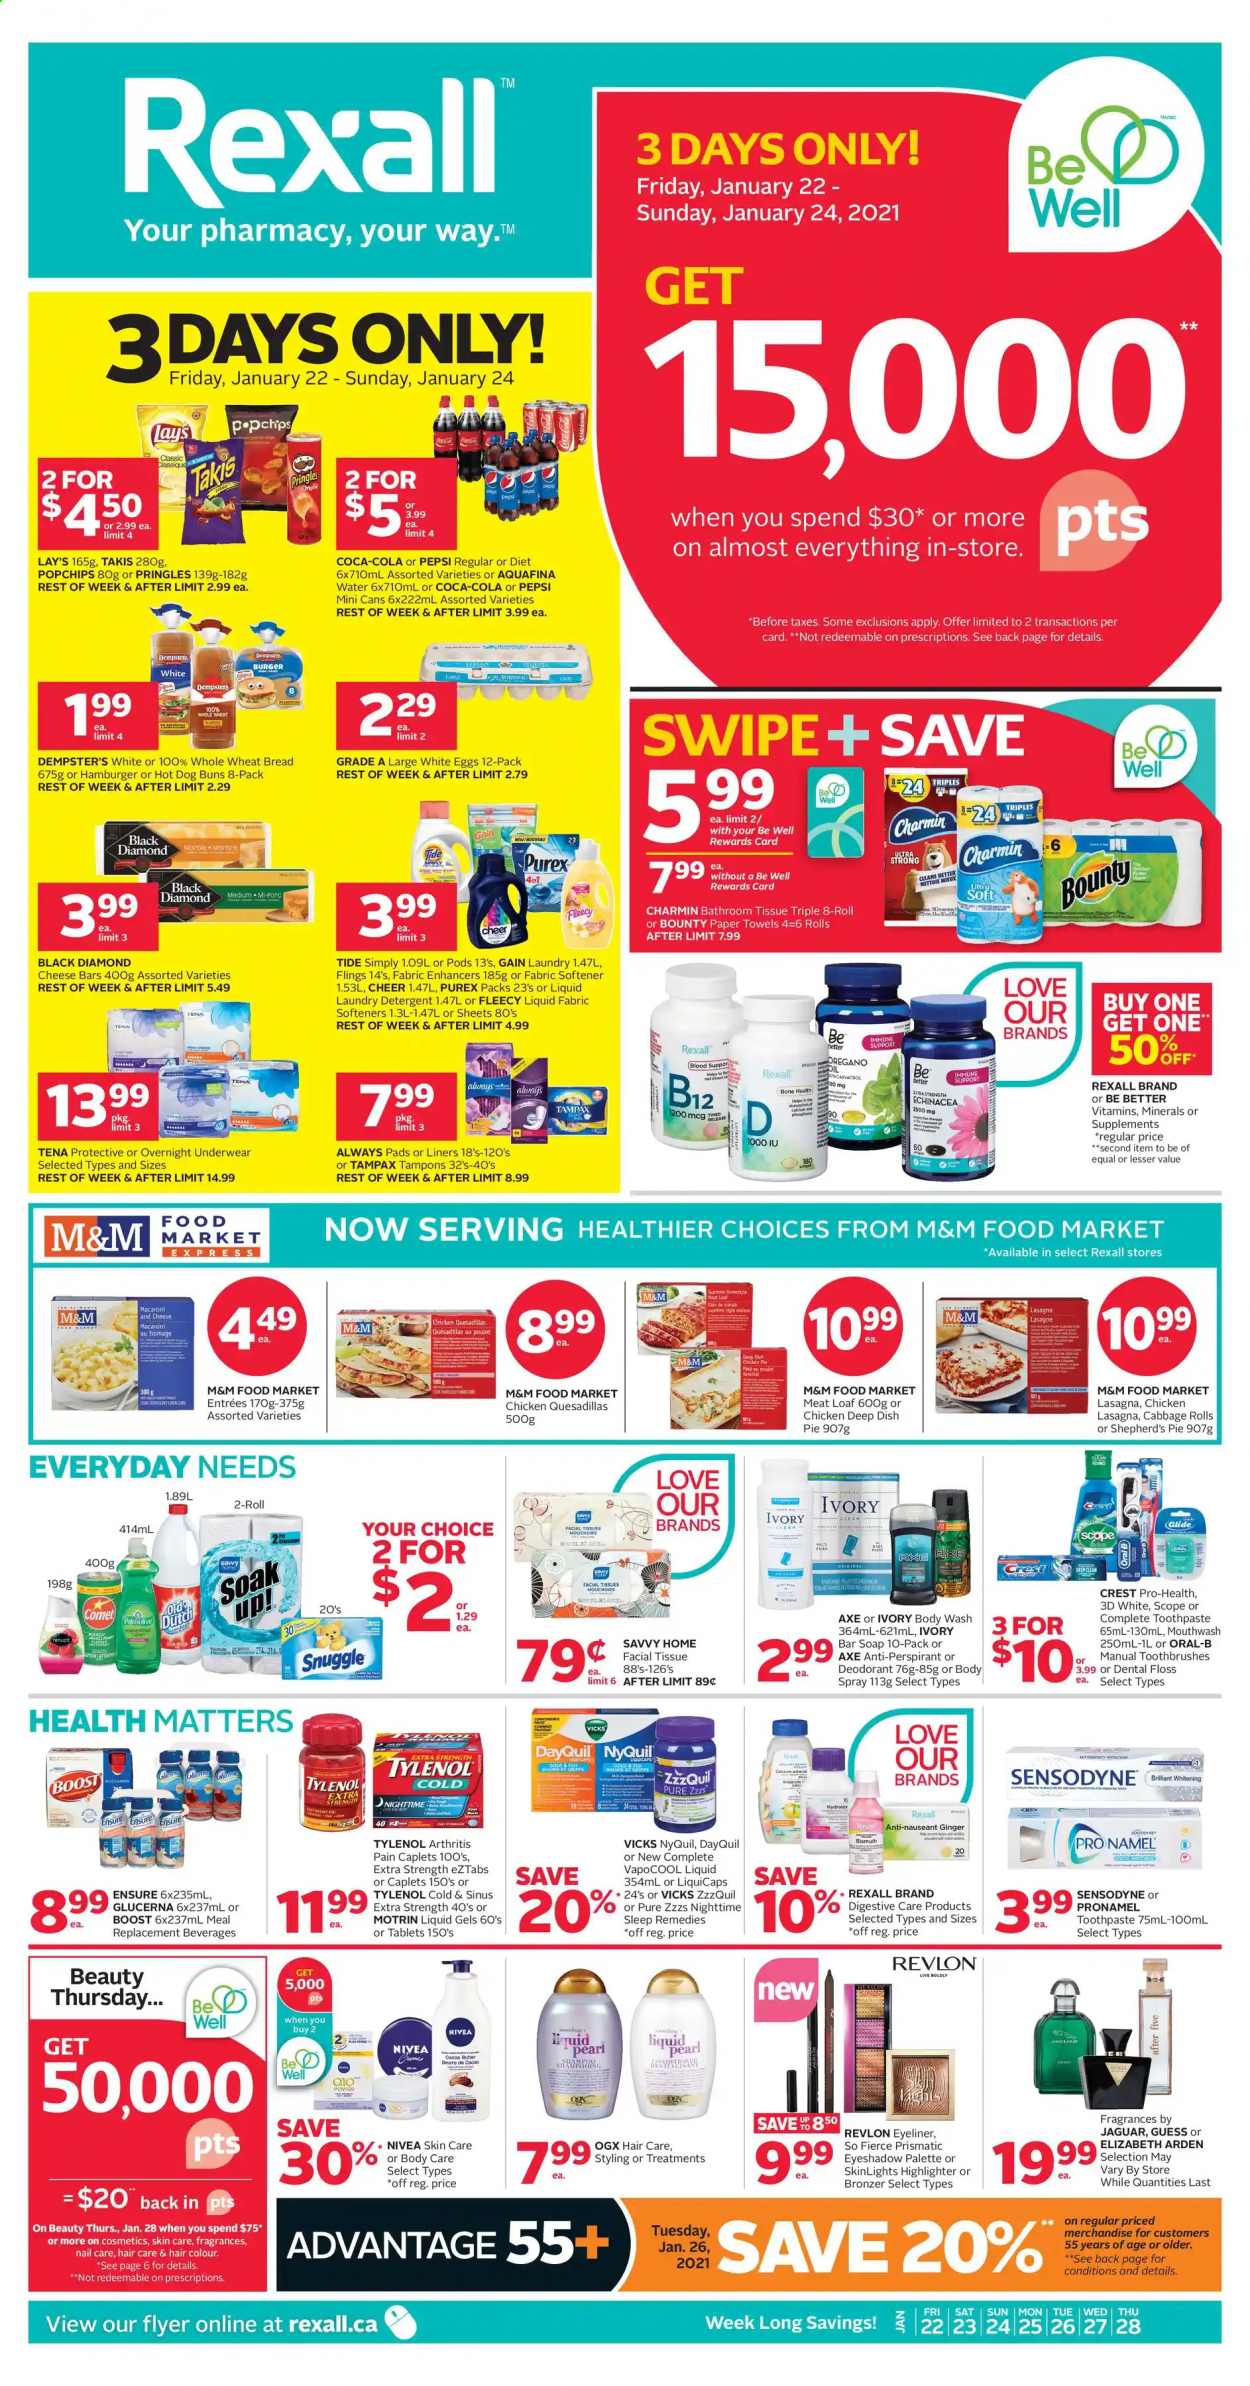 thumbnail - Rexall Flyer - January 22, 2021 - January 28, 2021 - Sales products - Bounty, Pringles, Lay’s, cabbage, ginger, Coca-Cola, Pepsi, Aquafina, Boost, bath tissue, kitchen towels, paper towels, Charmin, Gain, Snuggle, Tide, fabric softener, laundry detergent, Purex, body wash, soap bar, soap, toothpaste, mouthwash, Crest, Always pads, sanitary pads, tampons, facial tissues, OGX, Revlon, hair color, body spray, anti-perspirant, Guess, Vicks, eyeshadow, eyeliner, highlighter powder, bronzing powder, DayQuil, Tylenol, ZzzQuil, NyQuil, Glucerna, Motrin, Tampax, Palette, Nivea, Oral-B, Sensodyne, M&M's, deodorant. Page 1.